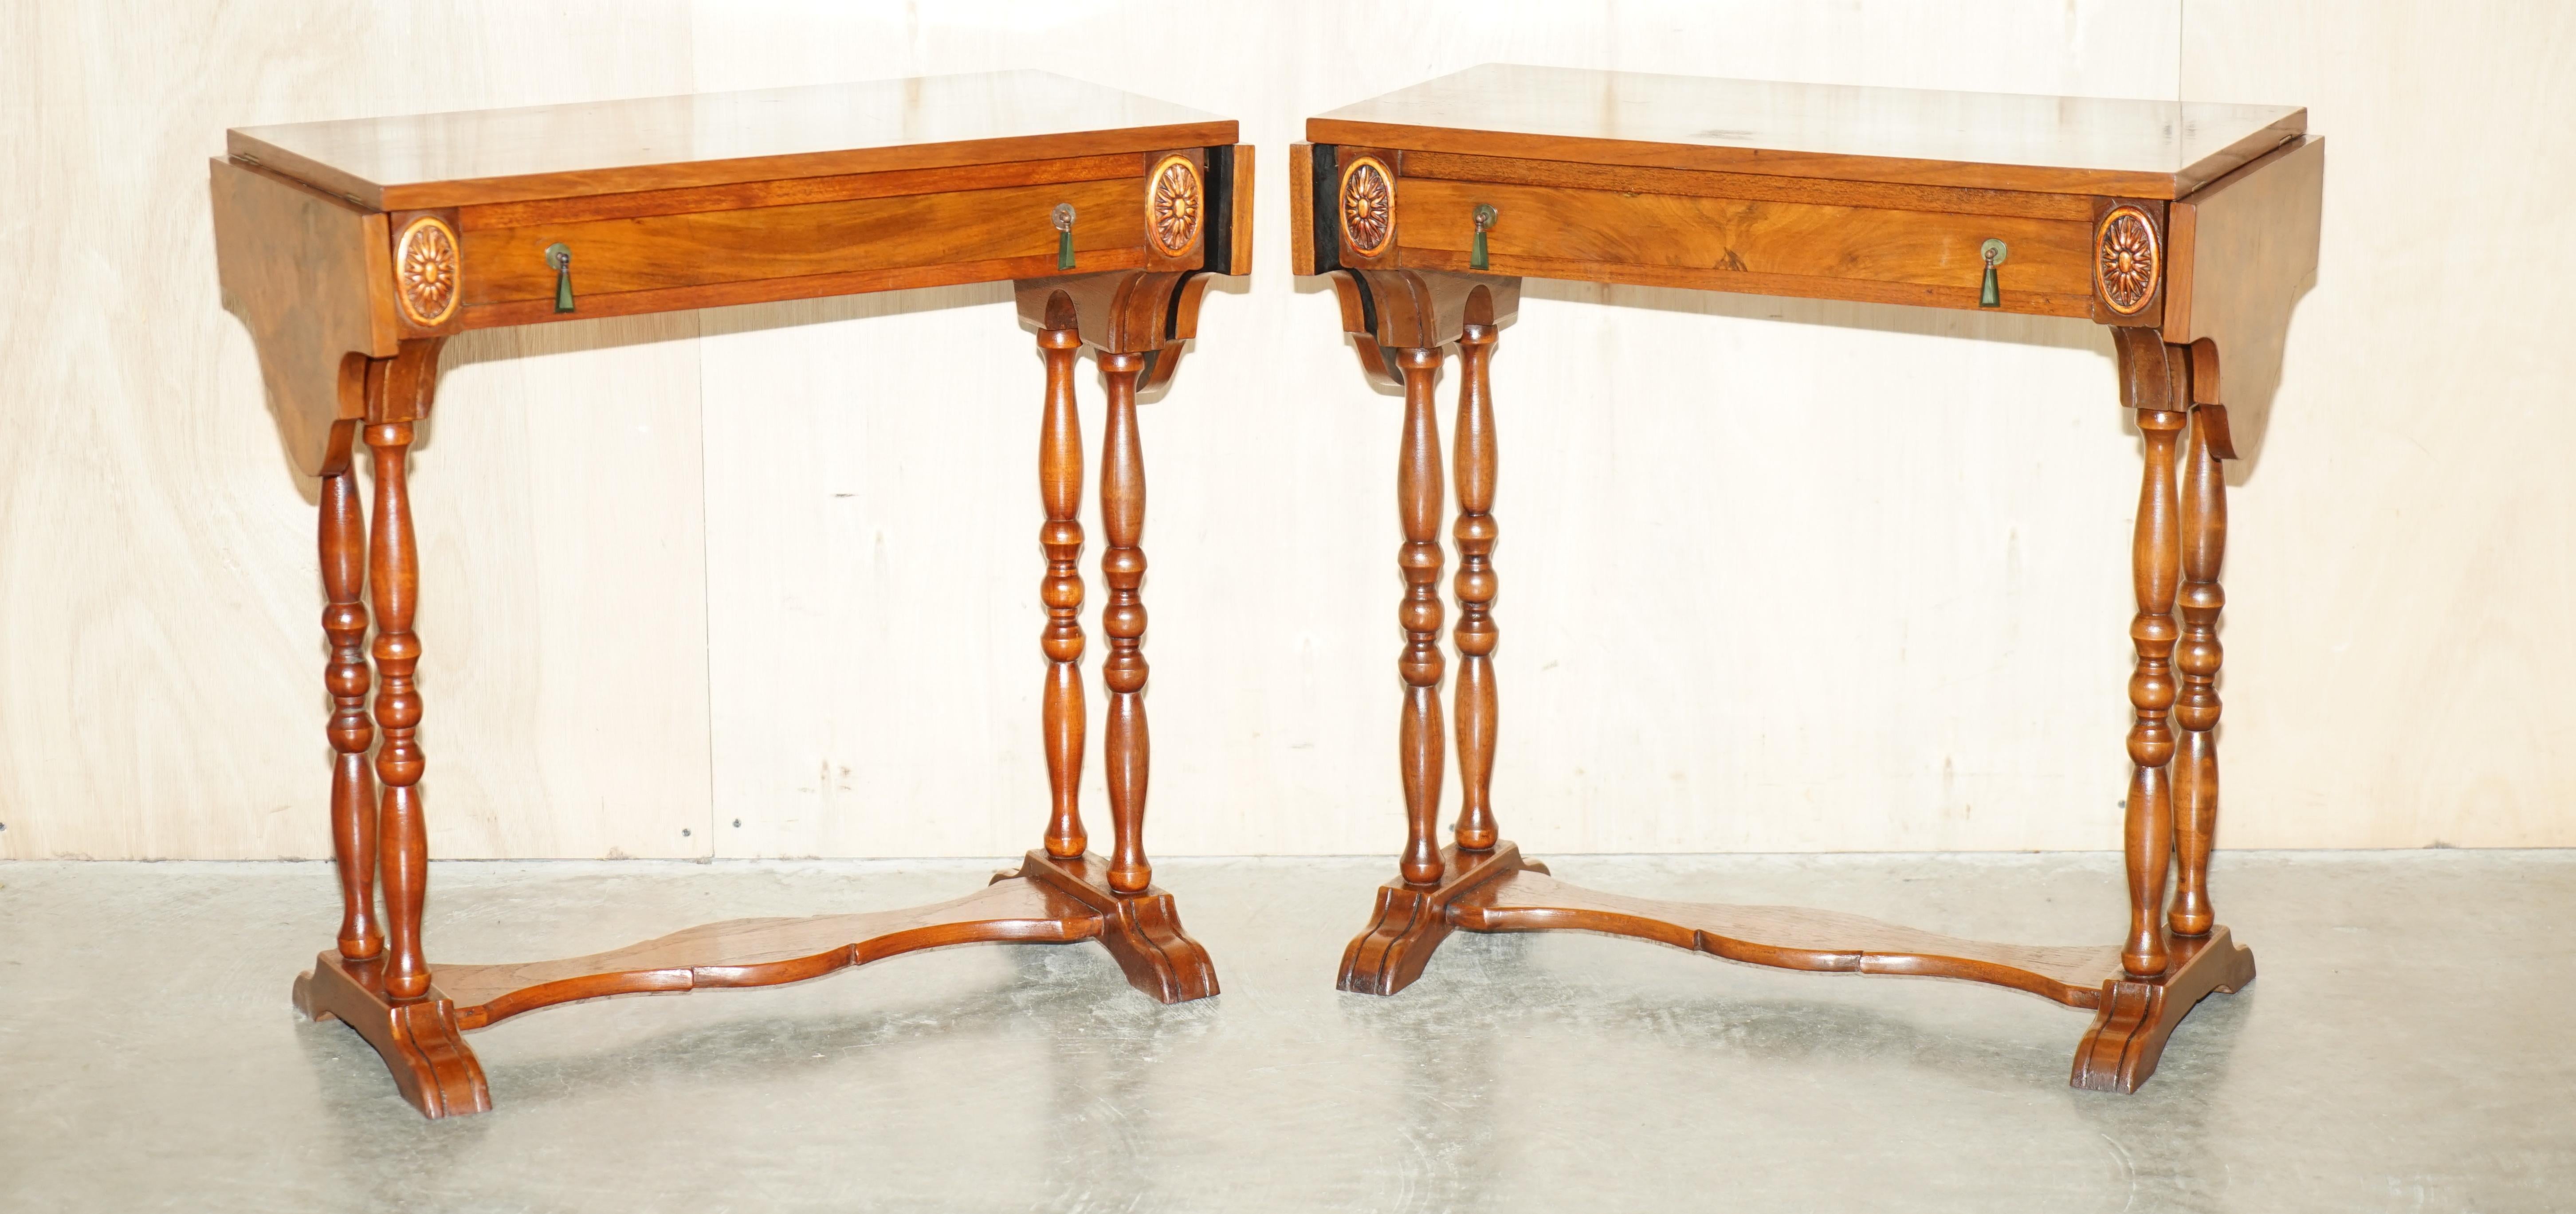 We are delighted to offer for sale this stunning and very rare pair of vintage, Burr figured Walnut occasional tables with extending tops 

A super decorative and well made pair, I have never seen them in Burr Walnut before, usually its beach with